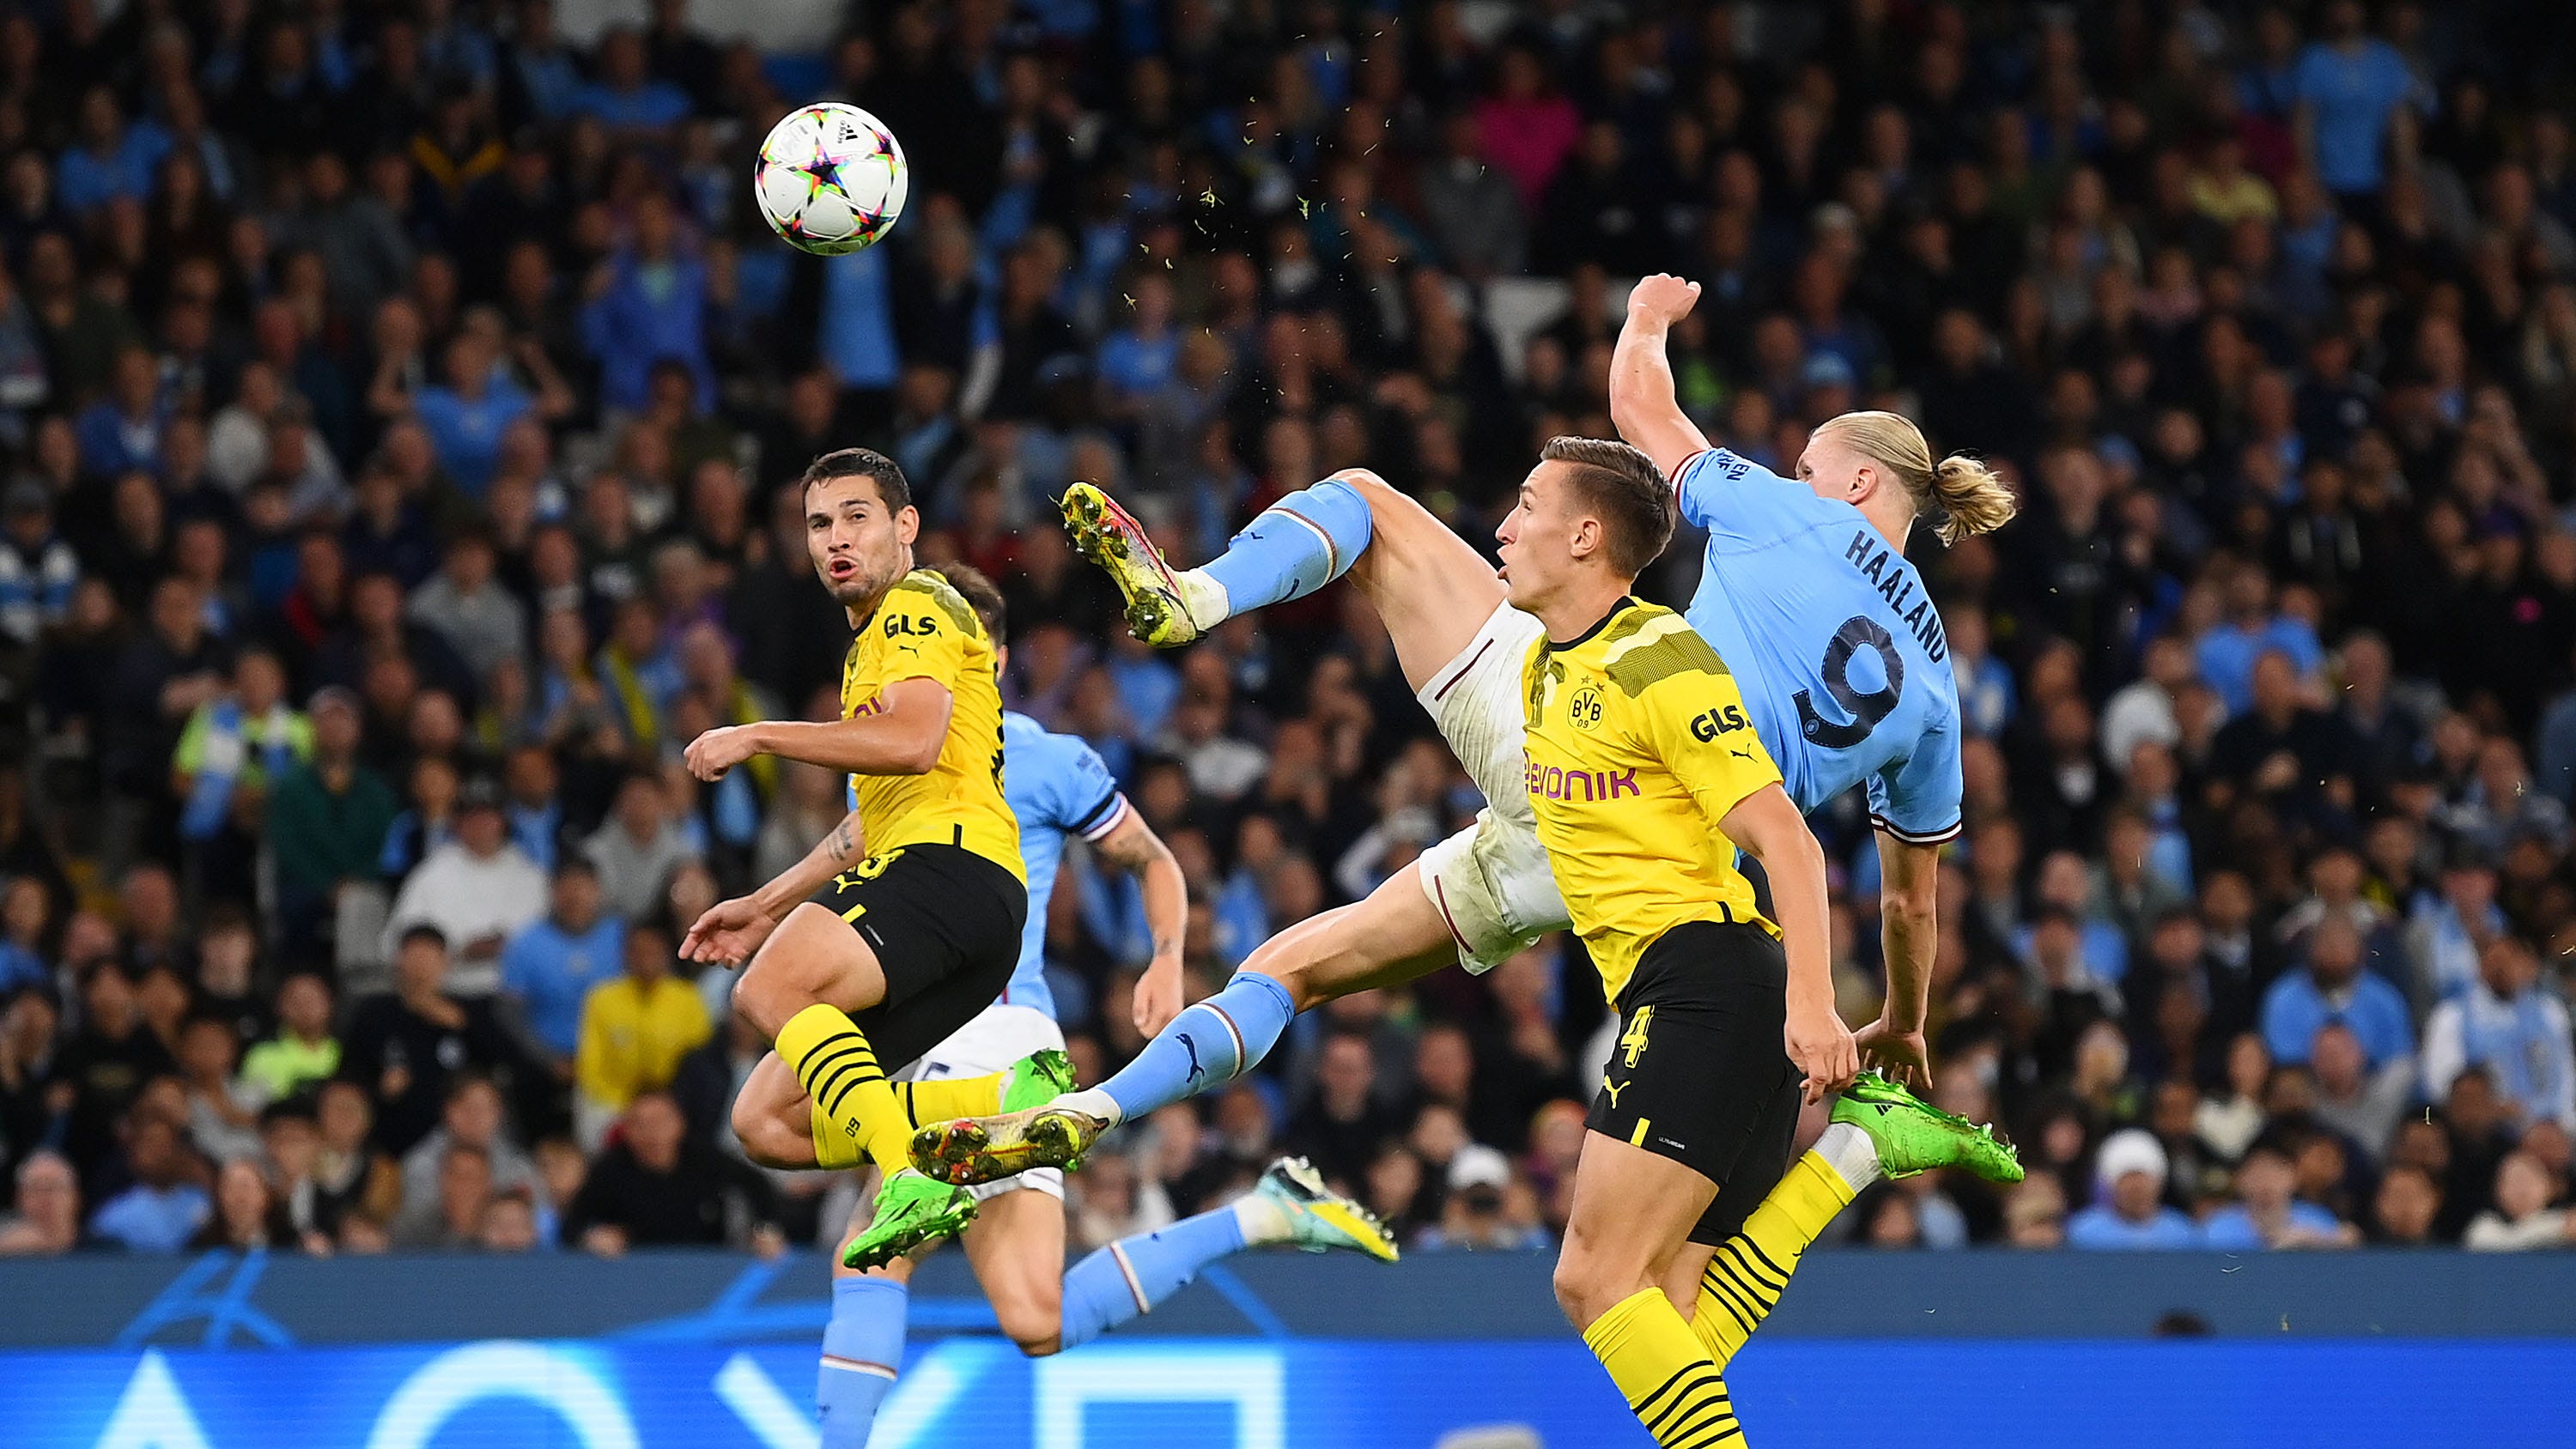 Erling Haaland's ridiculous goal leads Manchester City over Dortmund in  UEFA Champions League match - Sports - Sign Articles